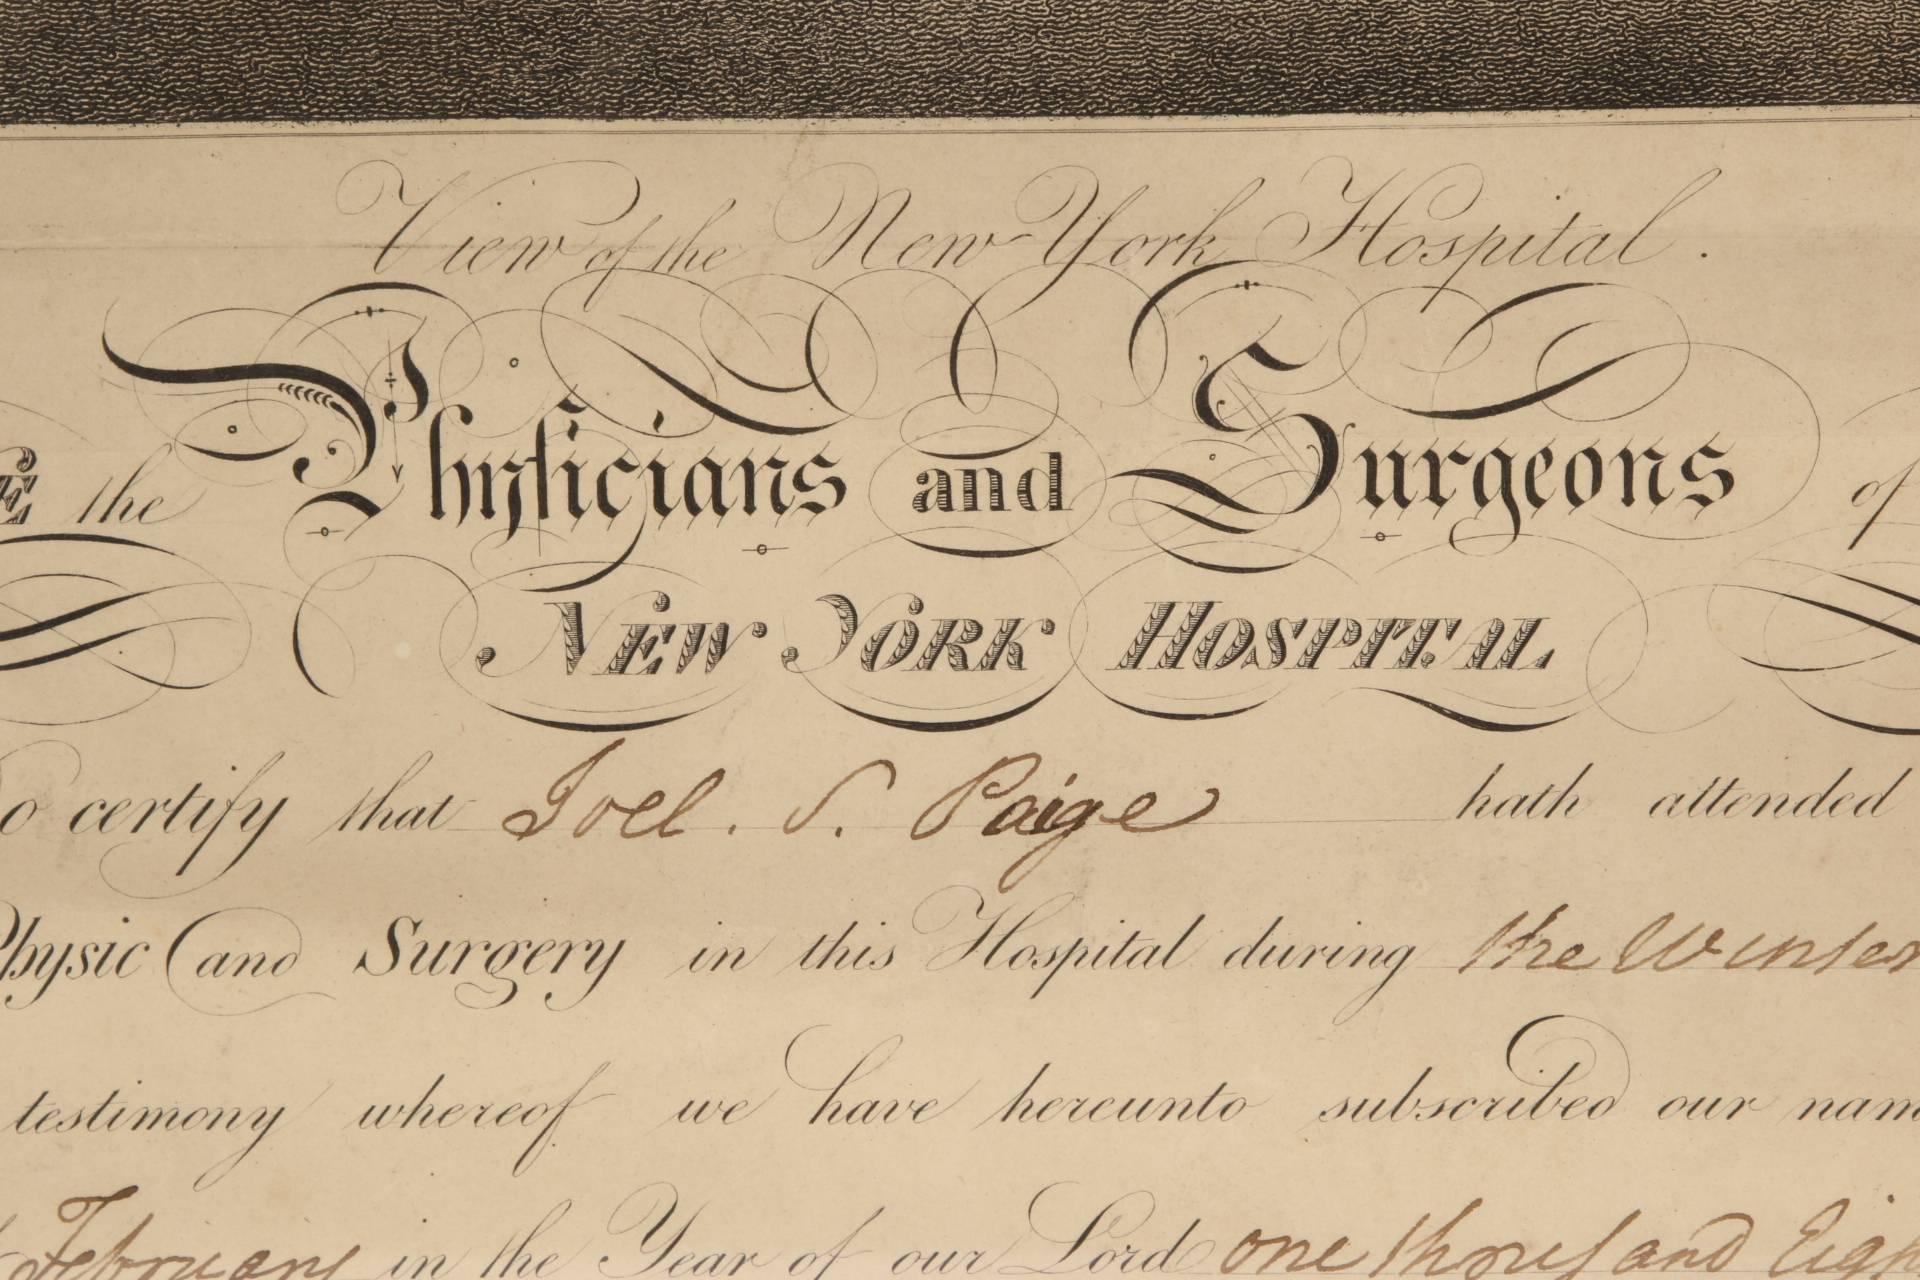 American Classical Early 19th Century Medical Document from New York Hospital with Engraving